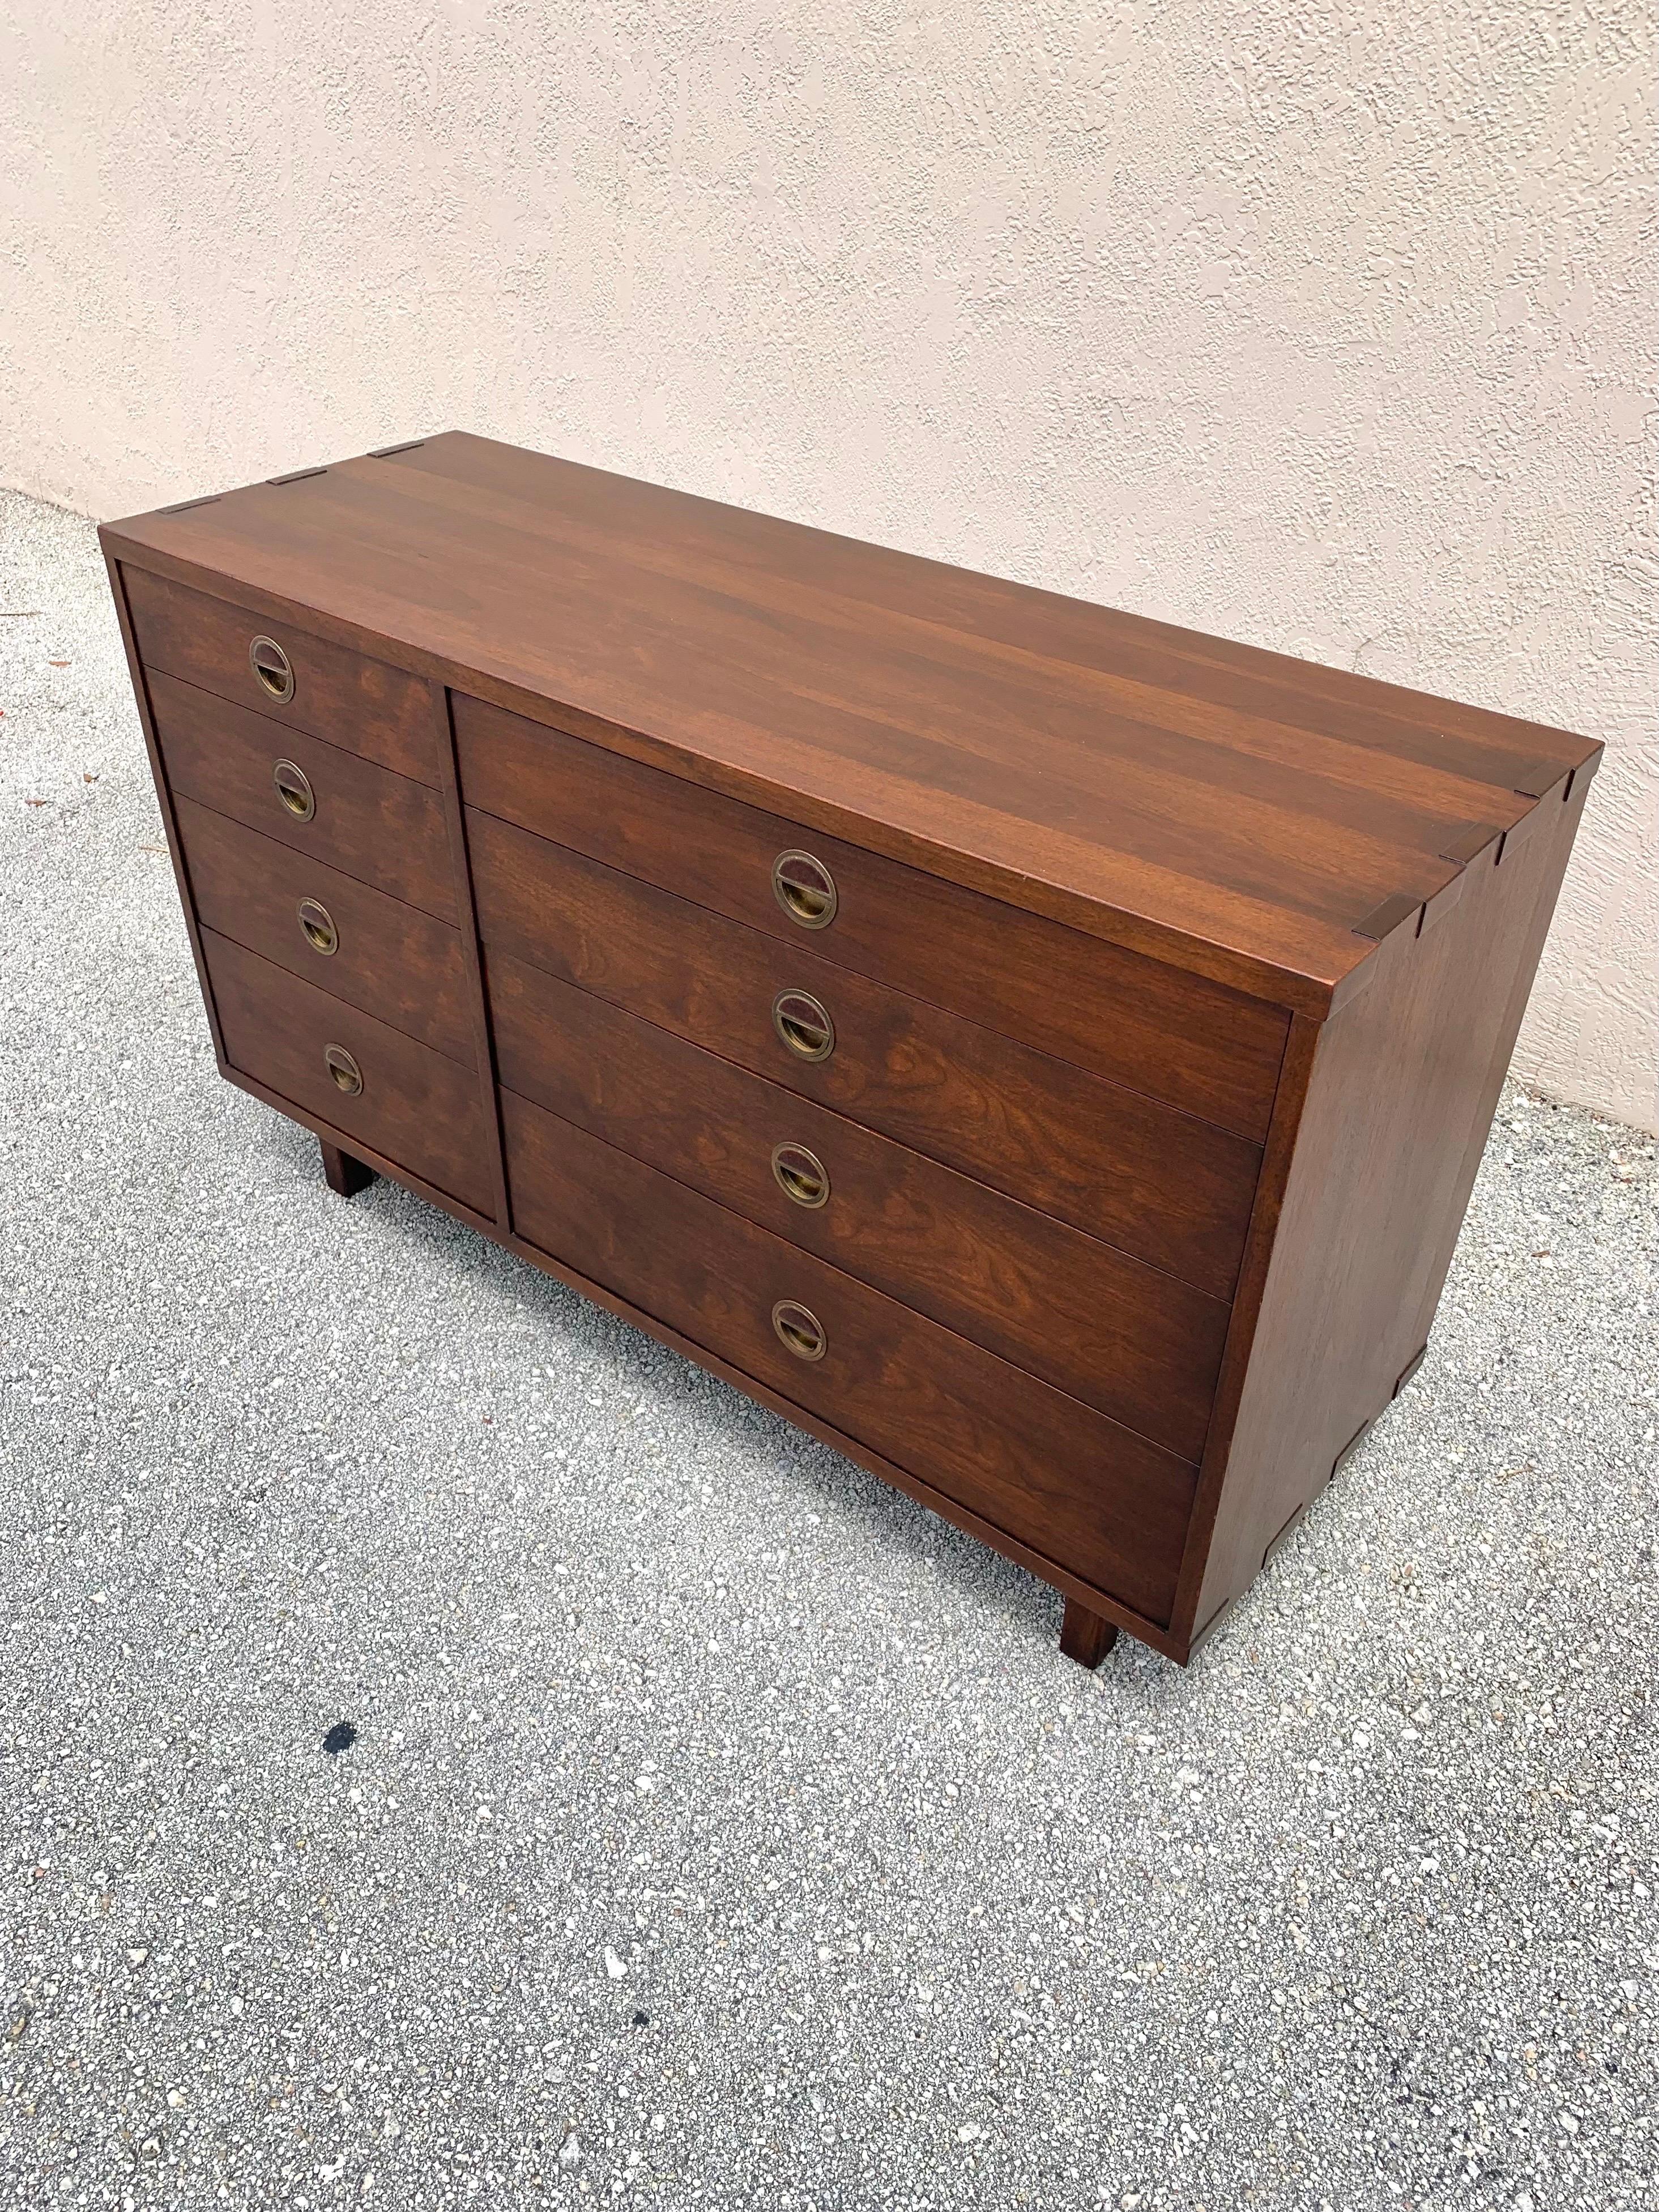 Chest of drawers designed by Edward Wormley for his Janus Collection for Dunbar Furniture. Made of walnut and expertly crafted. Beautiful joinery details on the corners of the cabinets. 8 drawers in total. Solid brass drawer pulls with Natzler for